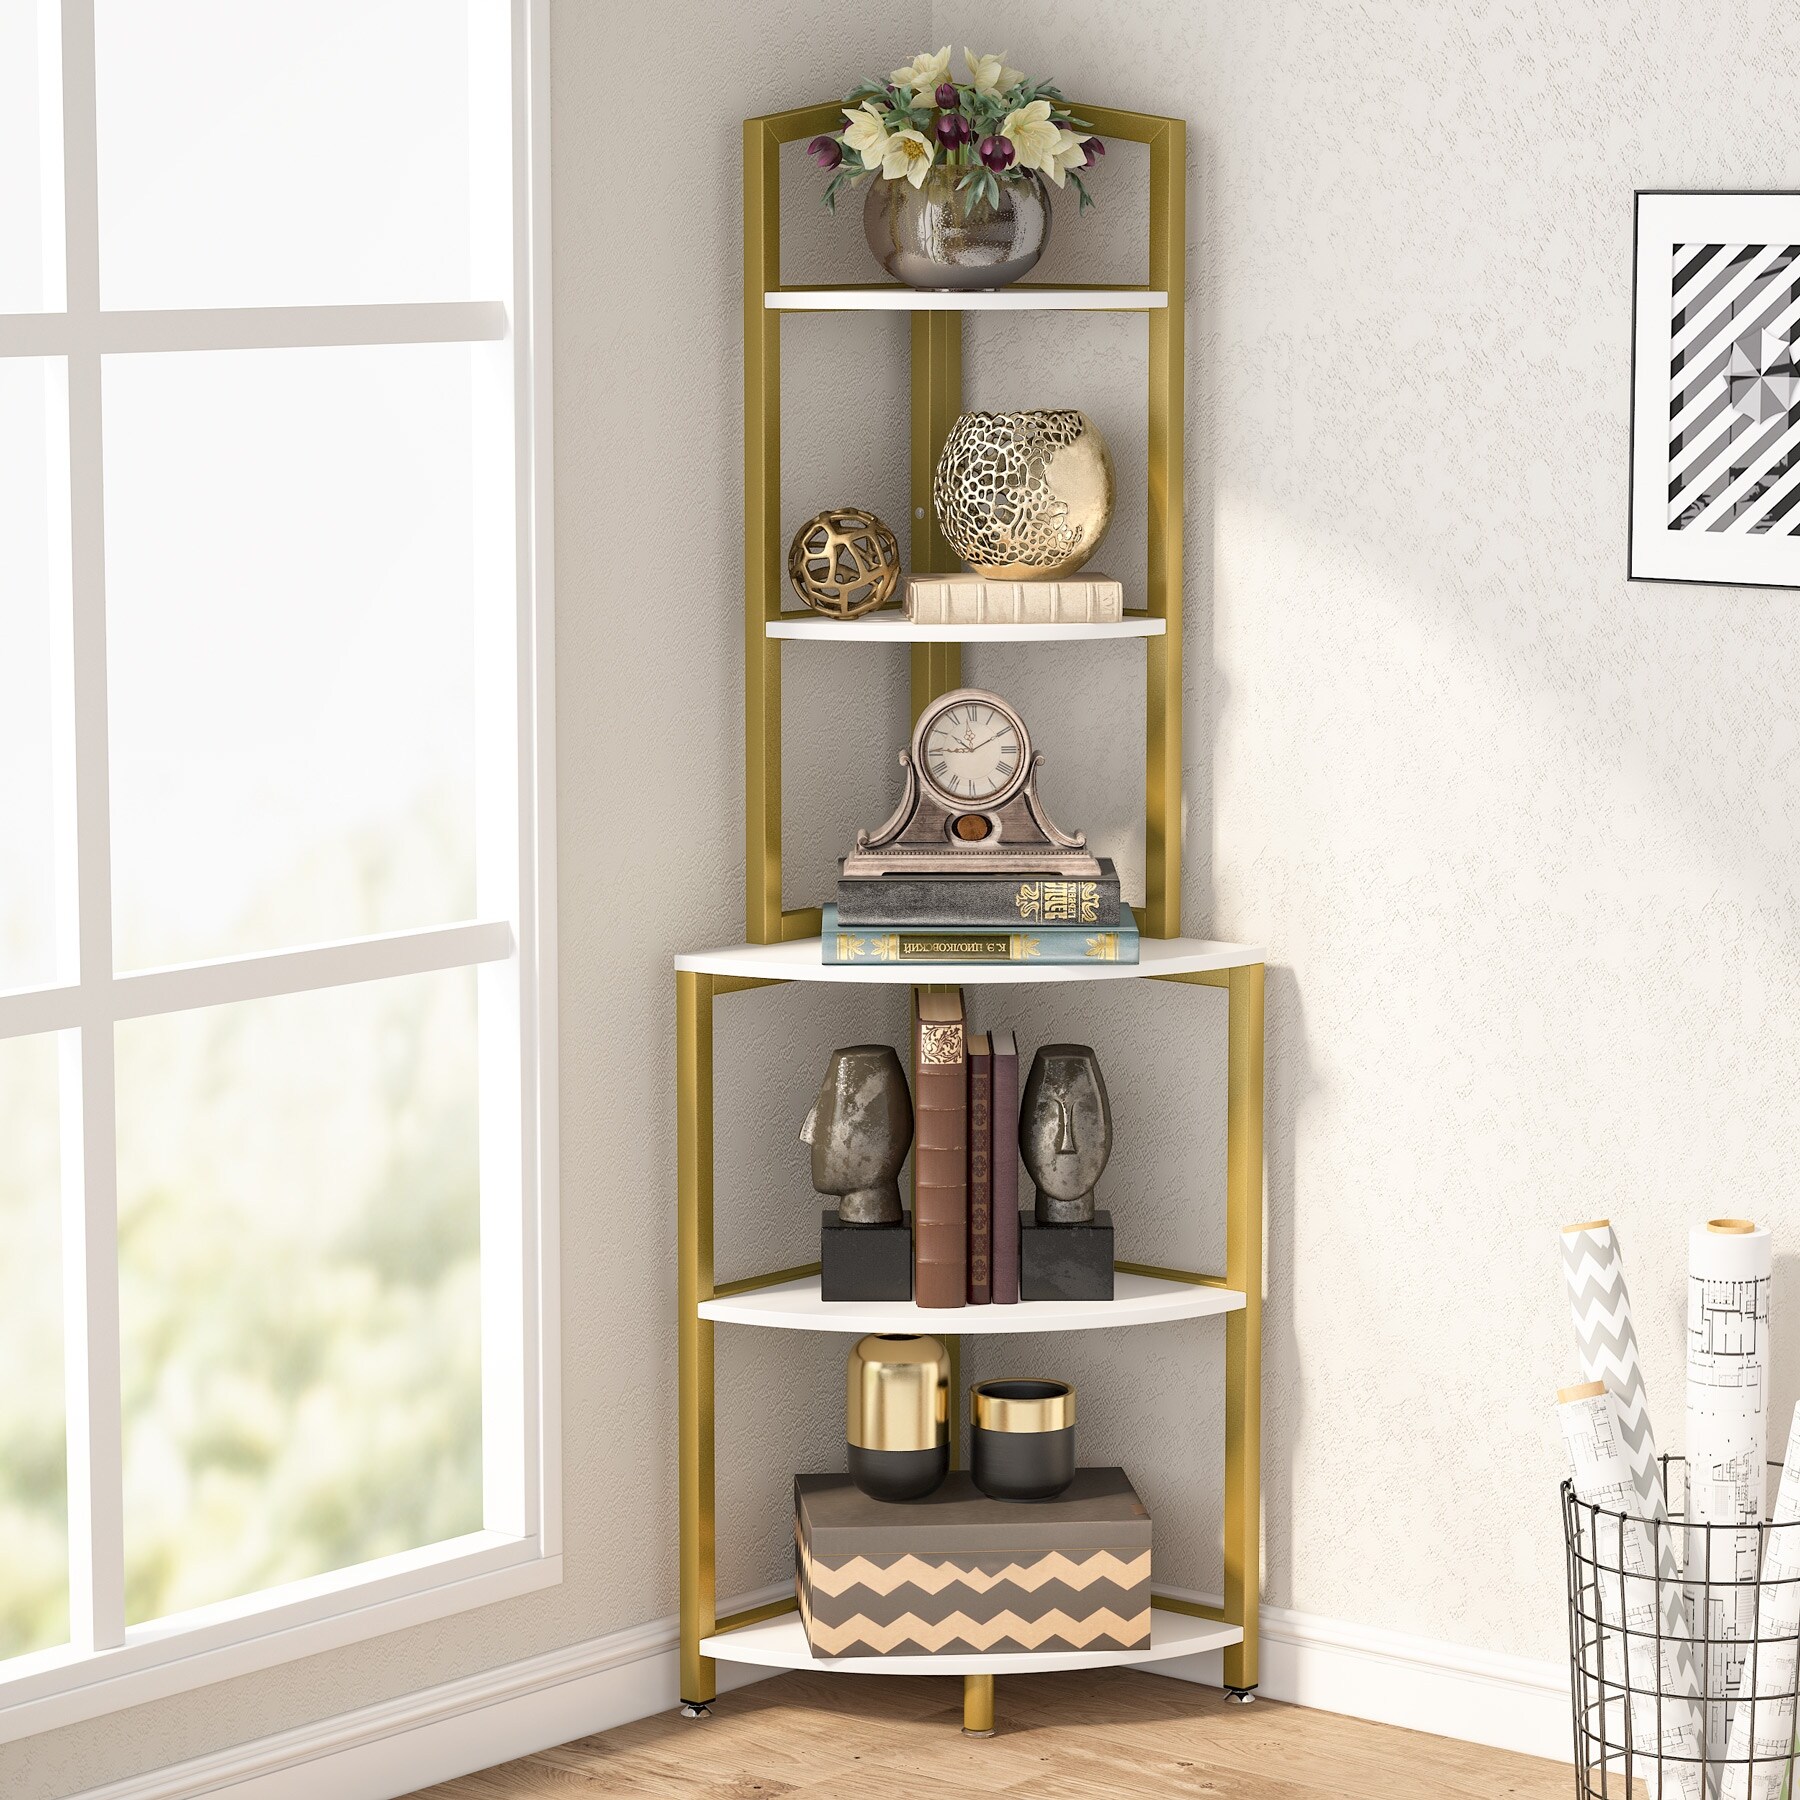 https://ak1.ostkcdn.com/images/products/is/images/direct/22a6839a9c15381f1c48cfcbe04fc8b2620d91d4/60-Inch-Tall-Corner-Shelf%2C-5-Tier-Small-Bookcase%2C-Industrial-Plant-Stand-for-Living-Room%2C-Bedroom%2C-Home-Office.jpg